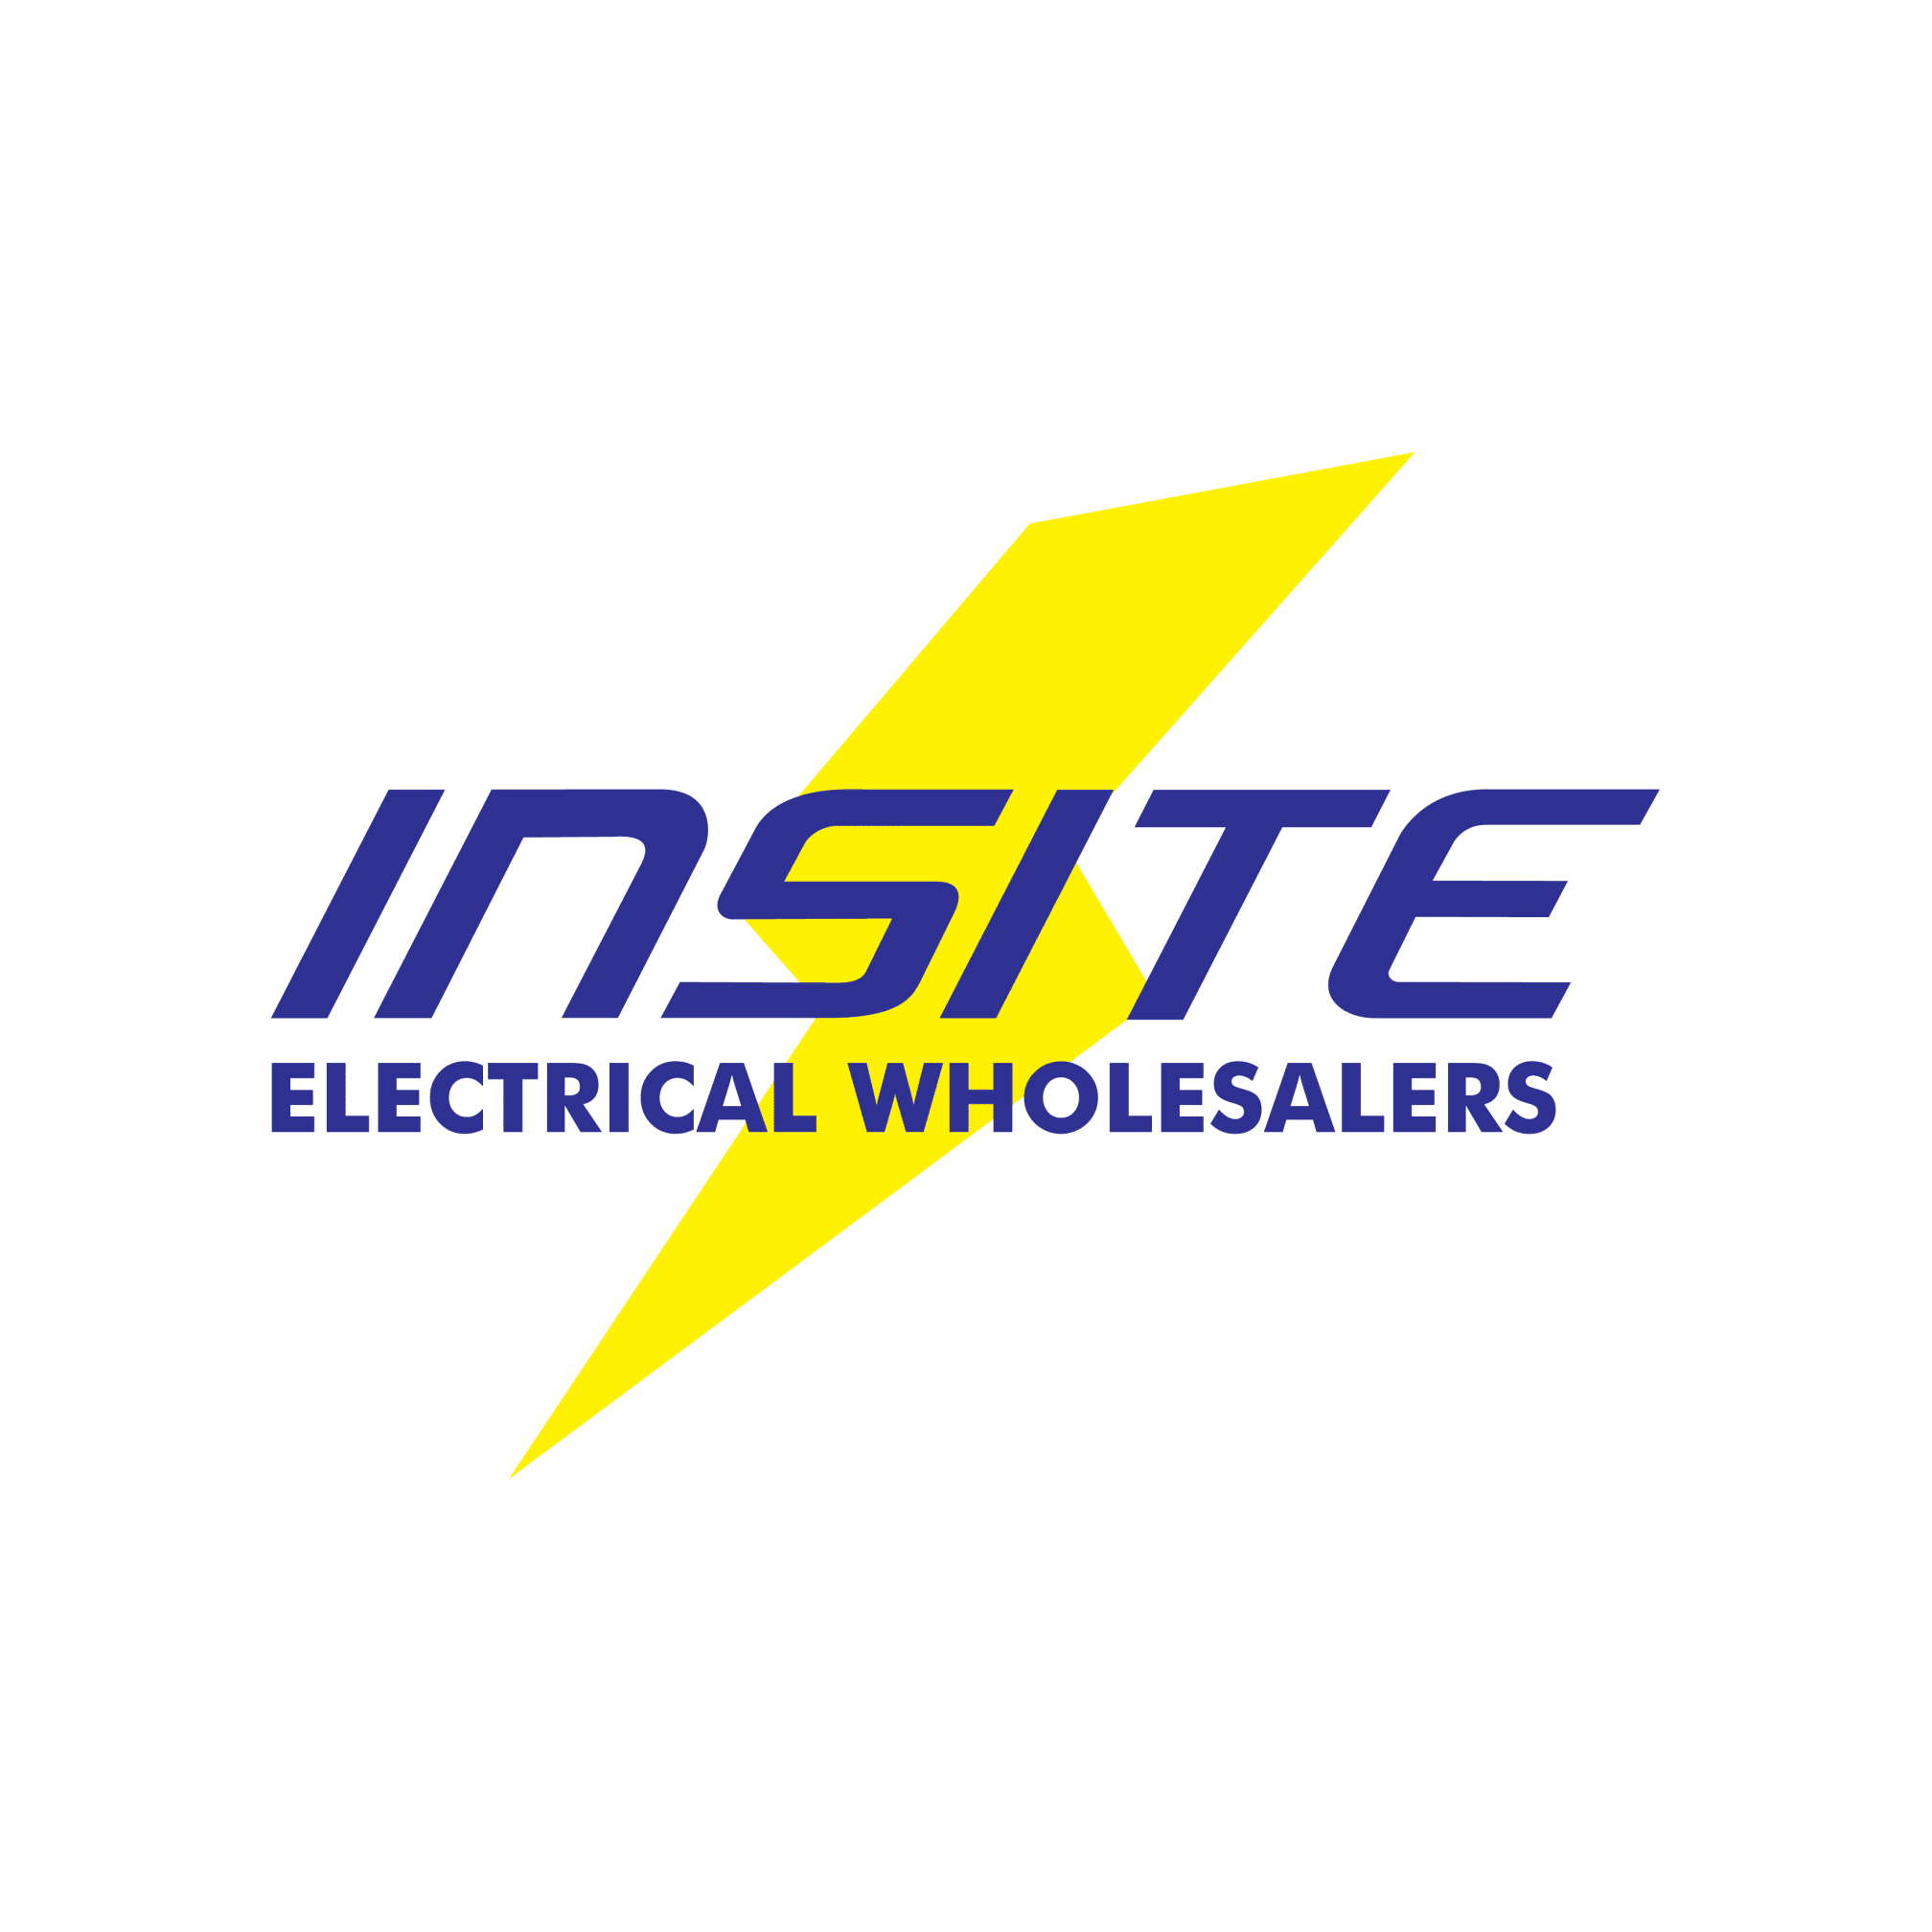 Insite Electrical Wholesalers Logo